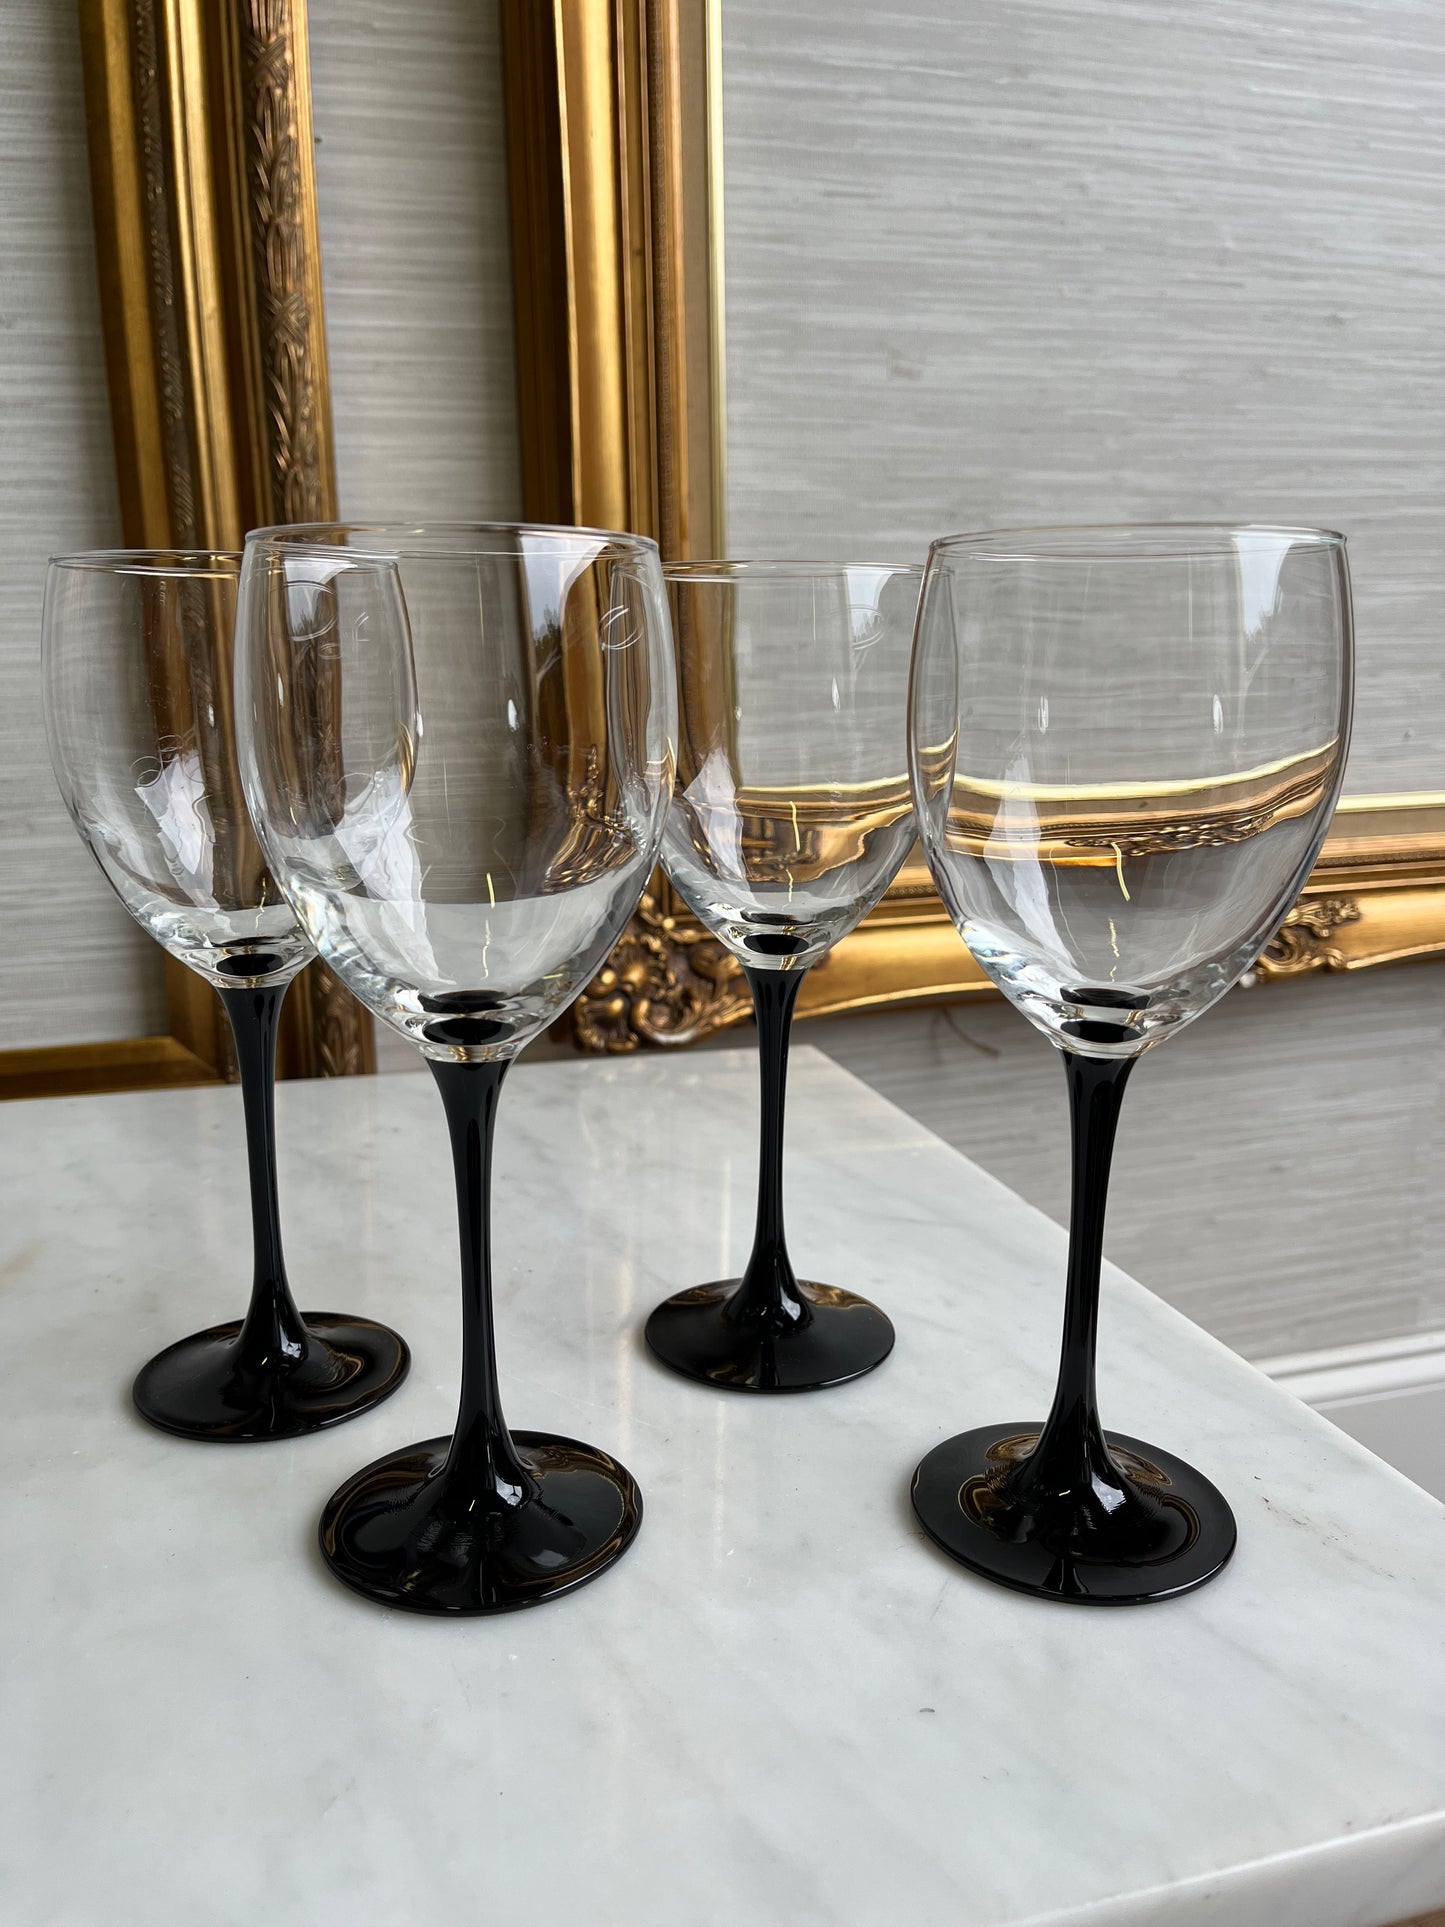 4 French Martini Glasses With Black Stem